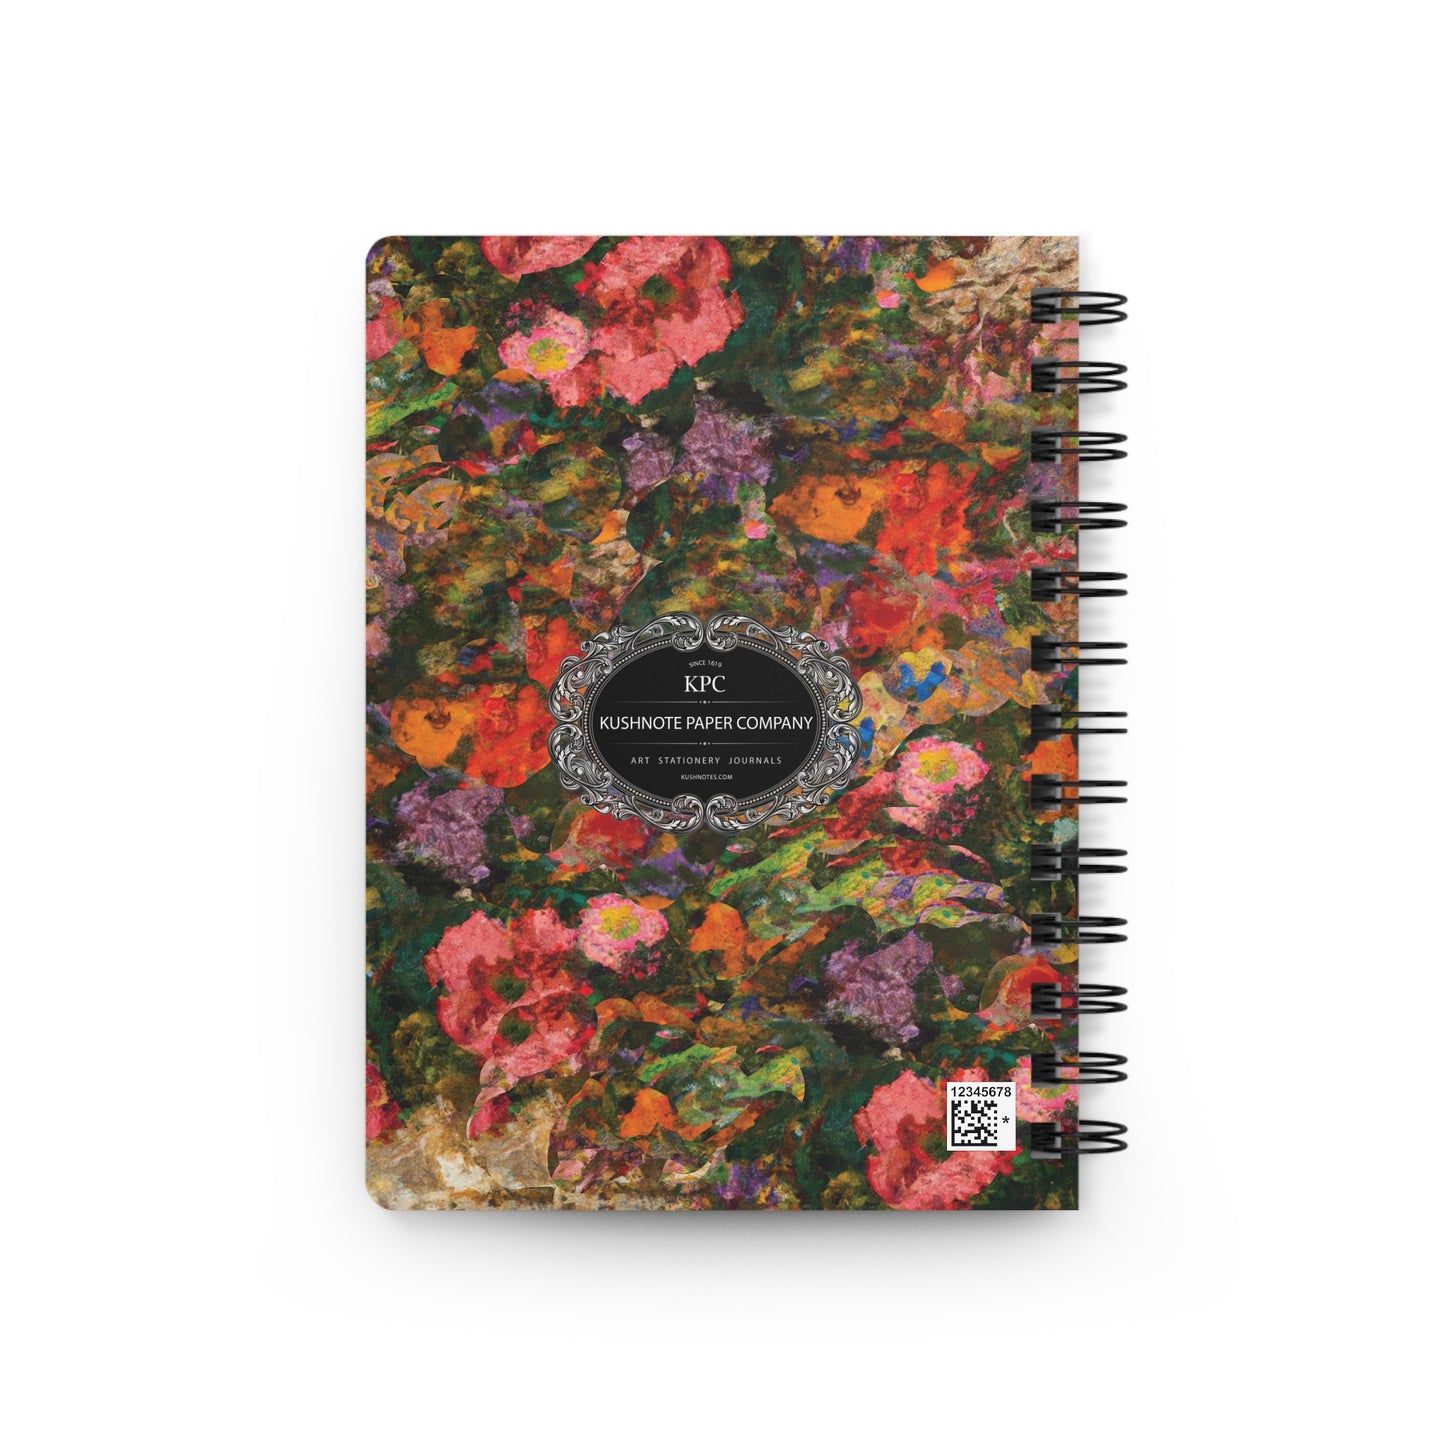 Isn't She Lovely Spiral Bound Notebooks and Journals with 2023-2024 Year-at-a-Glance Calendar